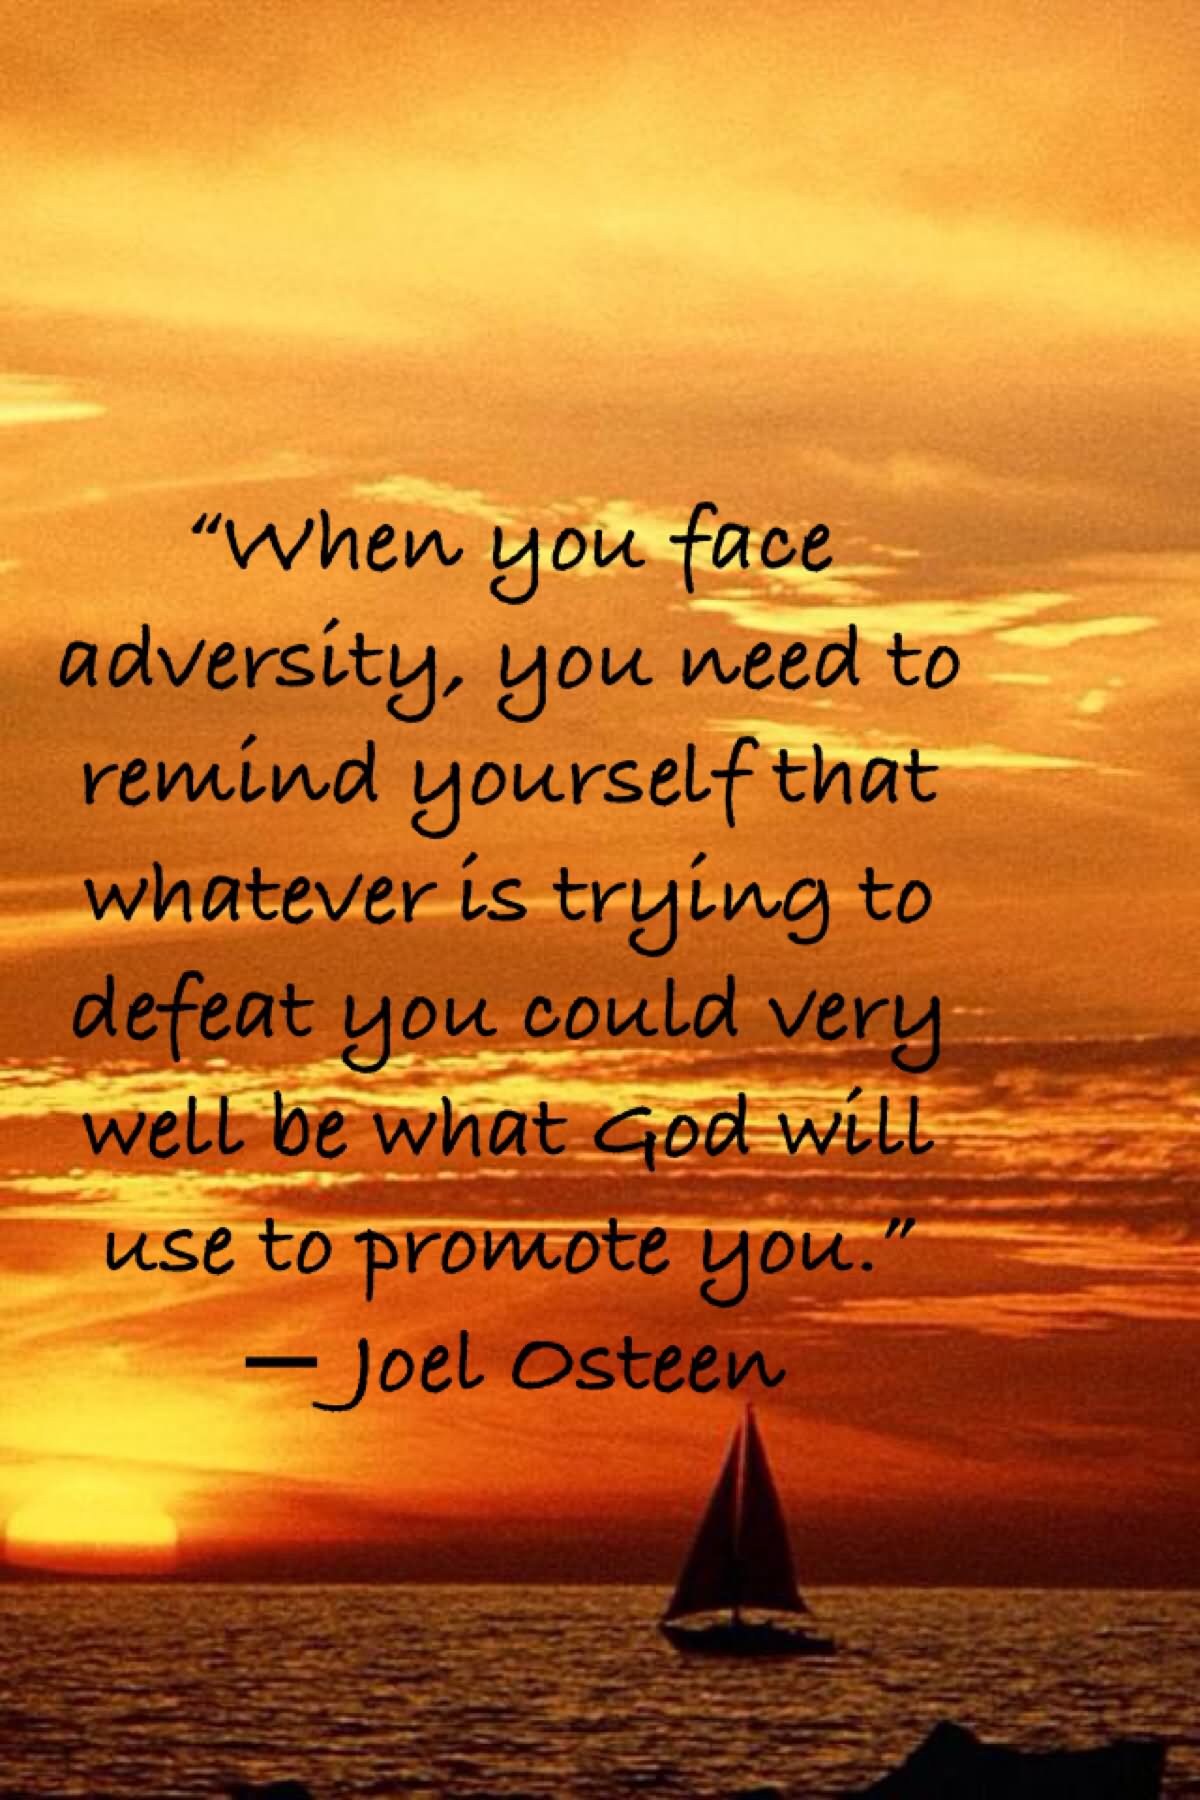 When you face adversity, you need to remind yourself that whatever is trying to defeat you could very well be what God will use to promote you. - Joel Osteen